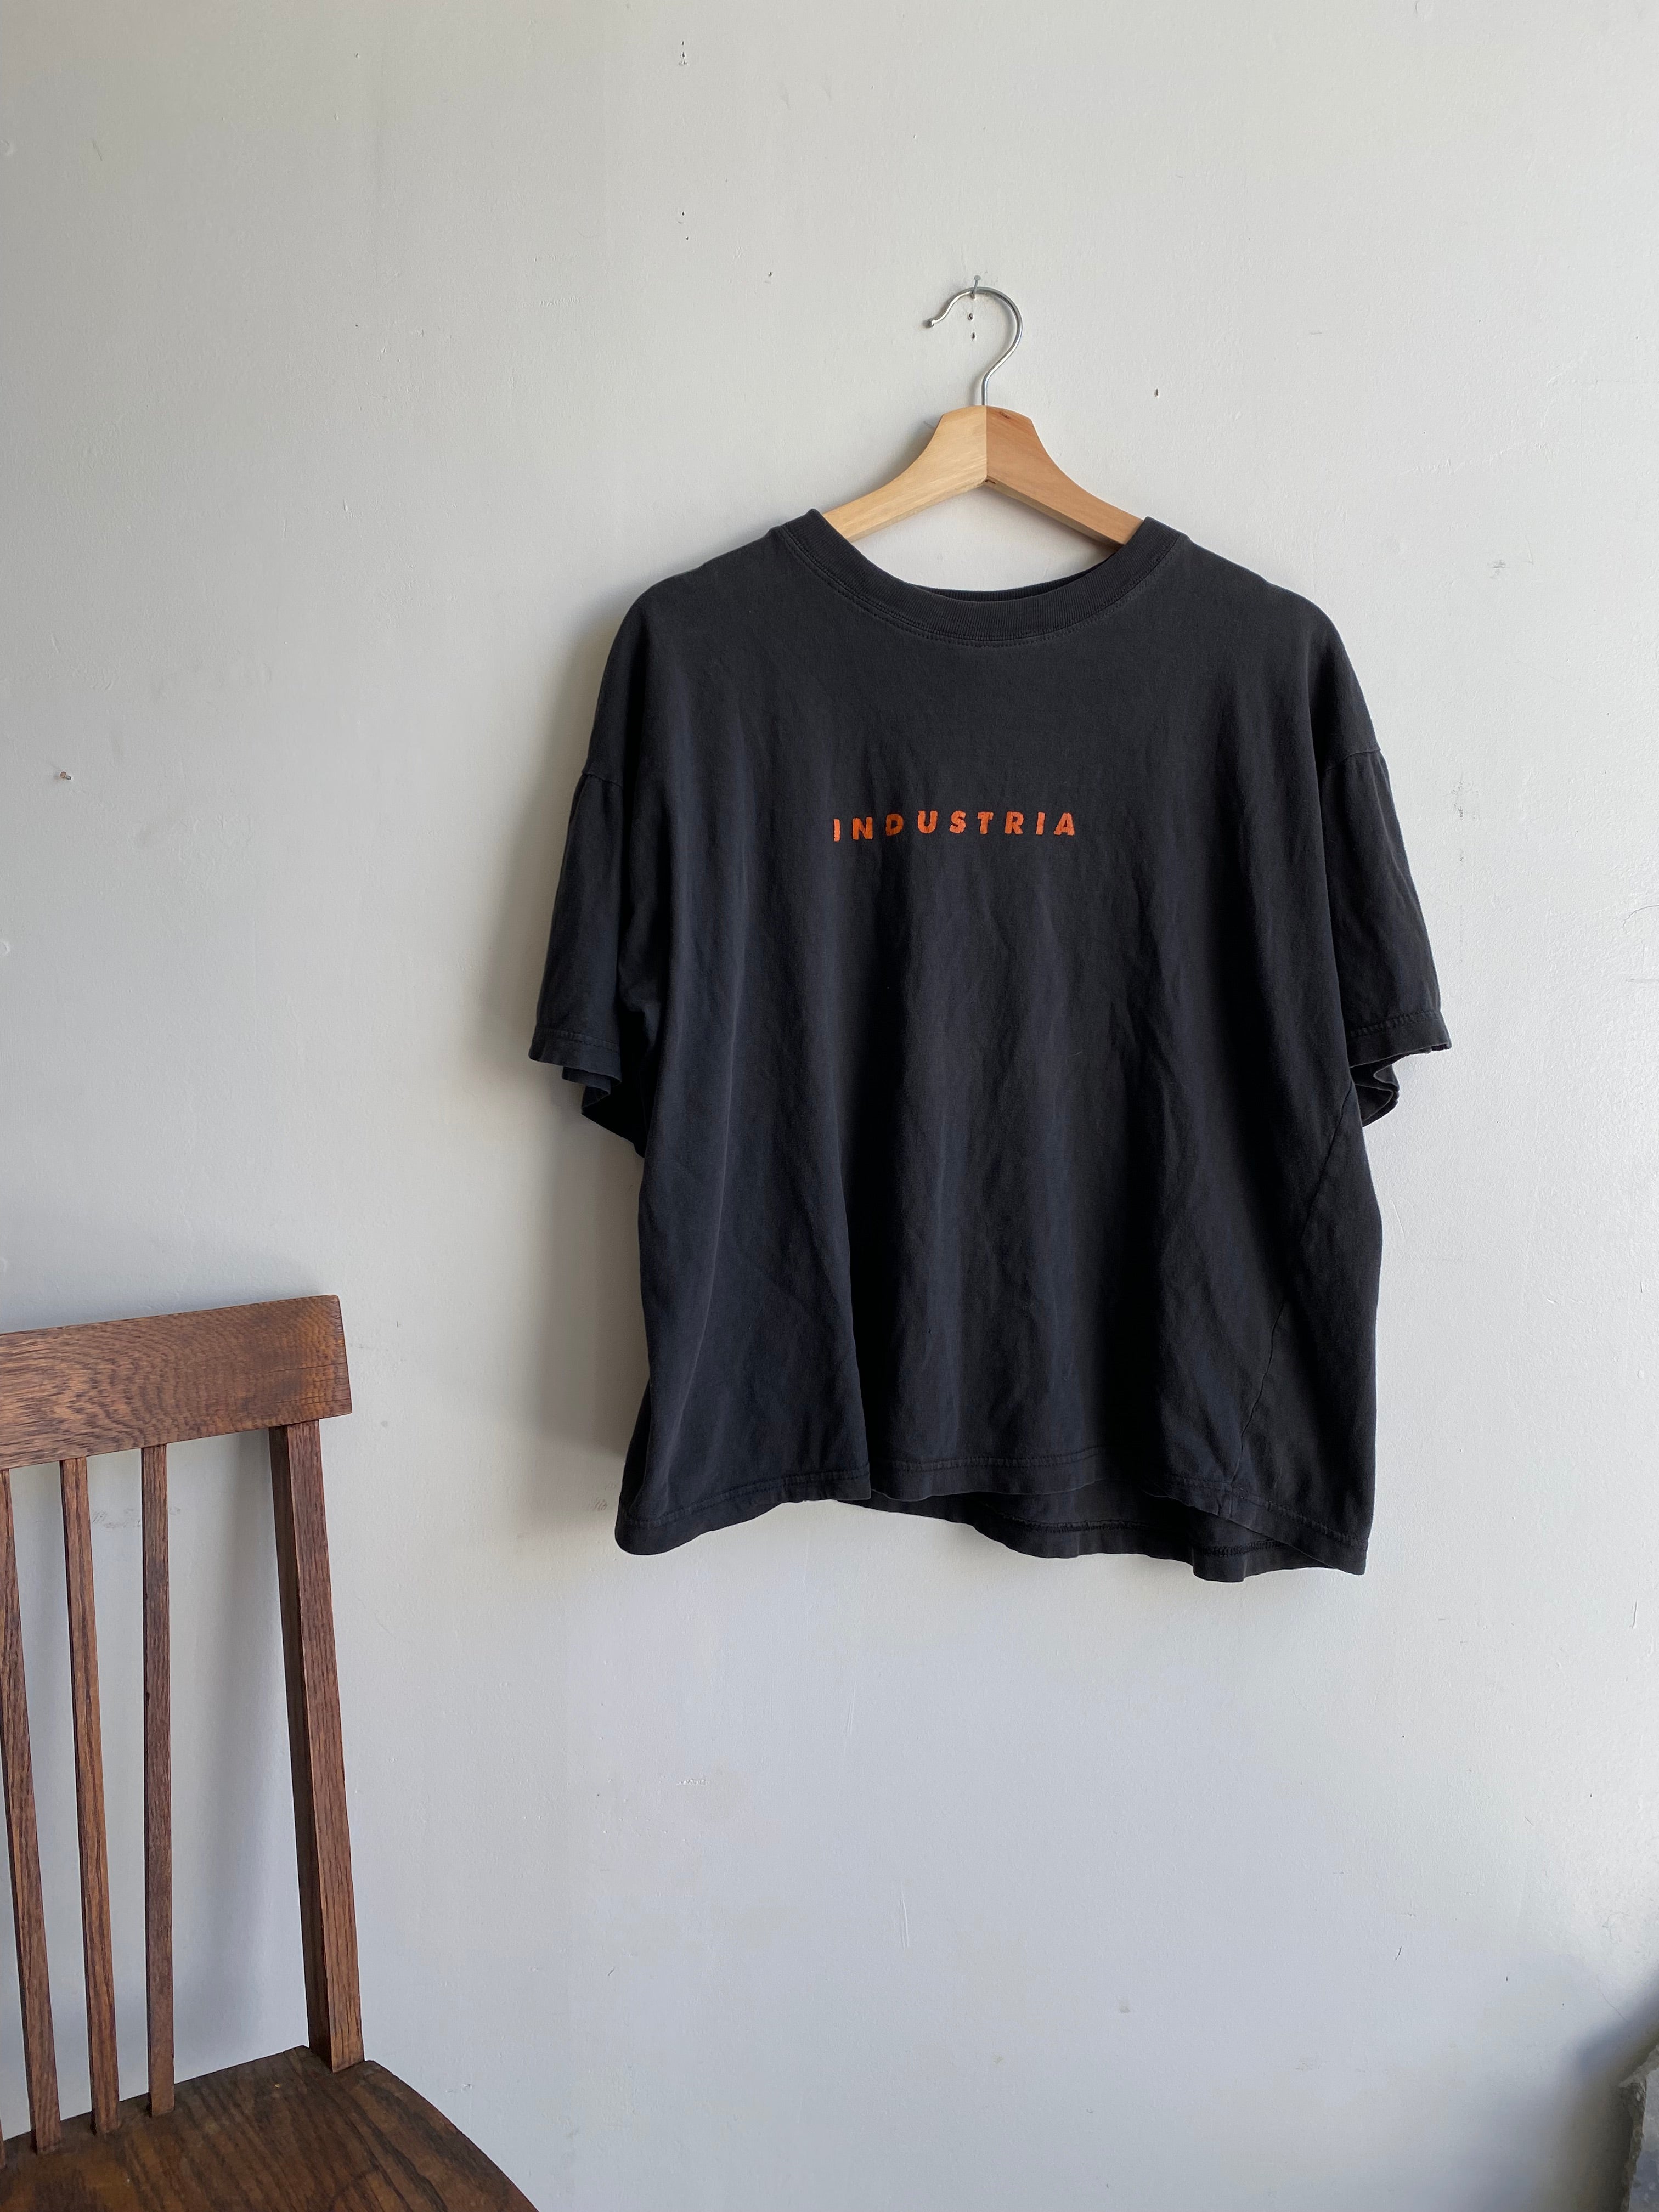 1990s Industria T-Shirt (Cropped Boxy M)